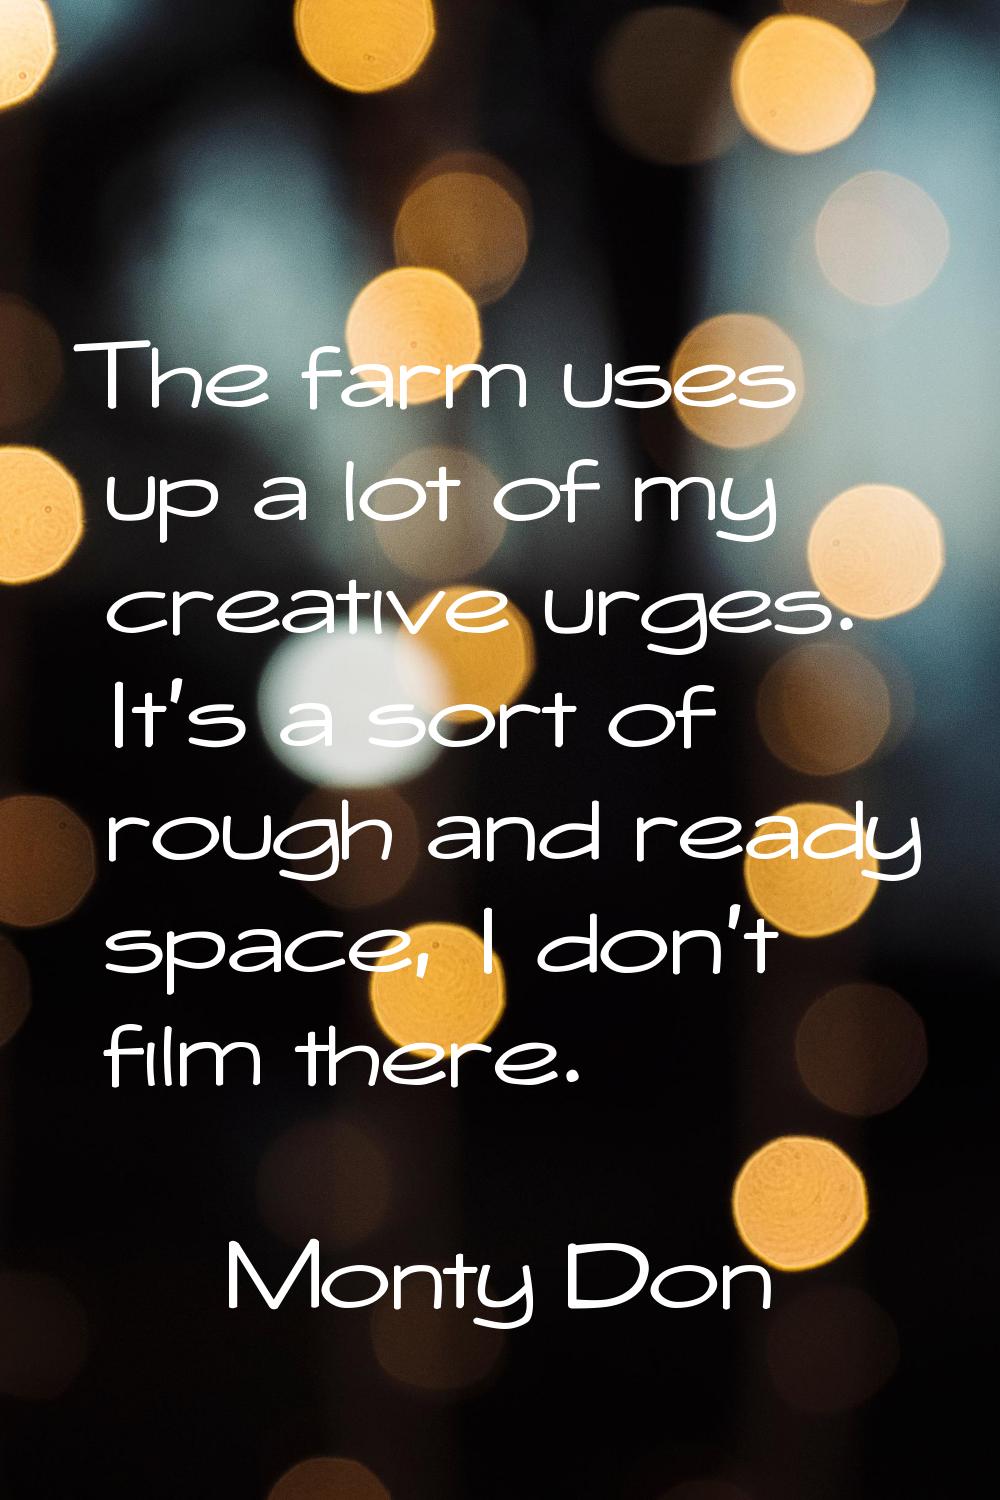 The farm uses up a lot of my creative urges. It's a sort of rough and ready space, I don't film the